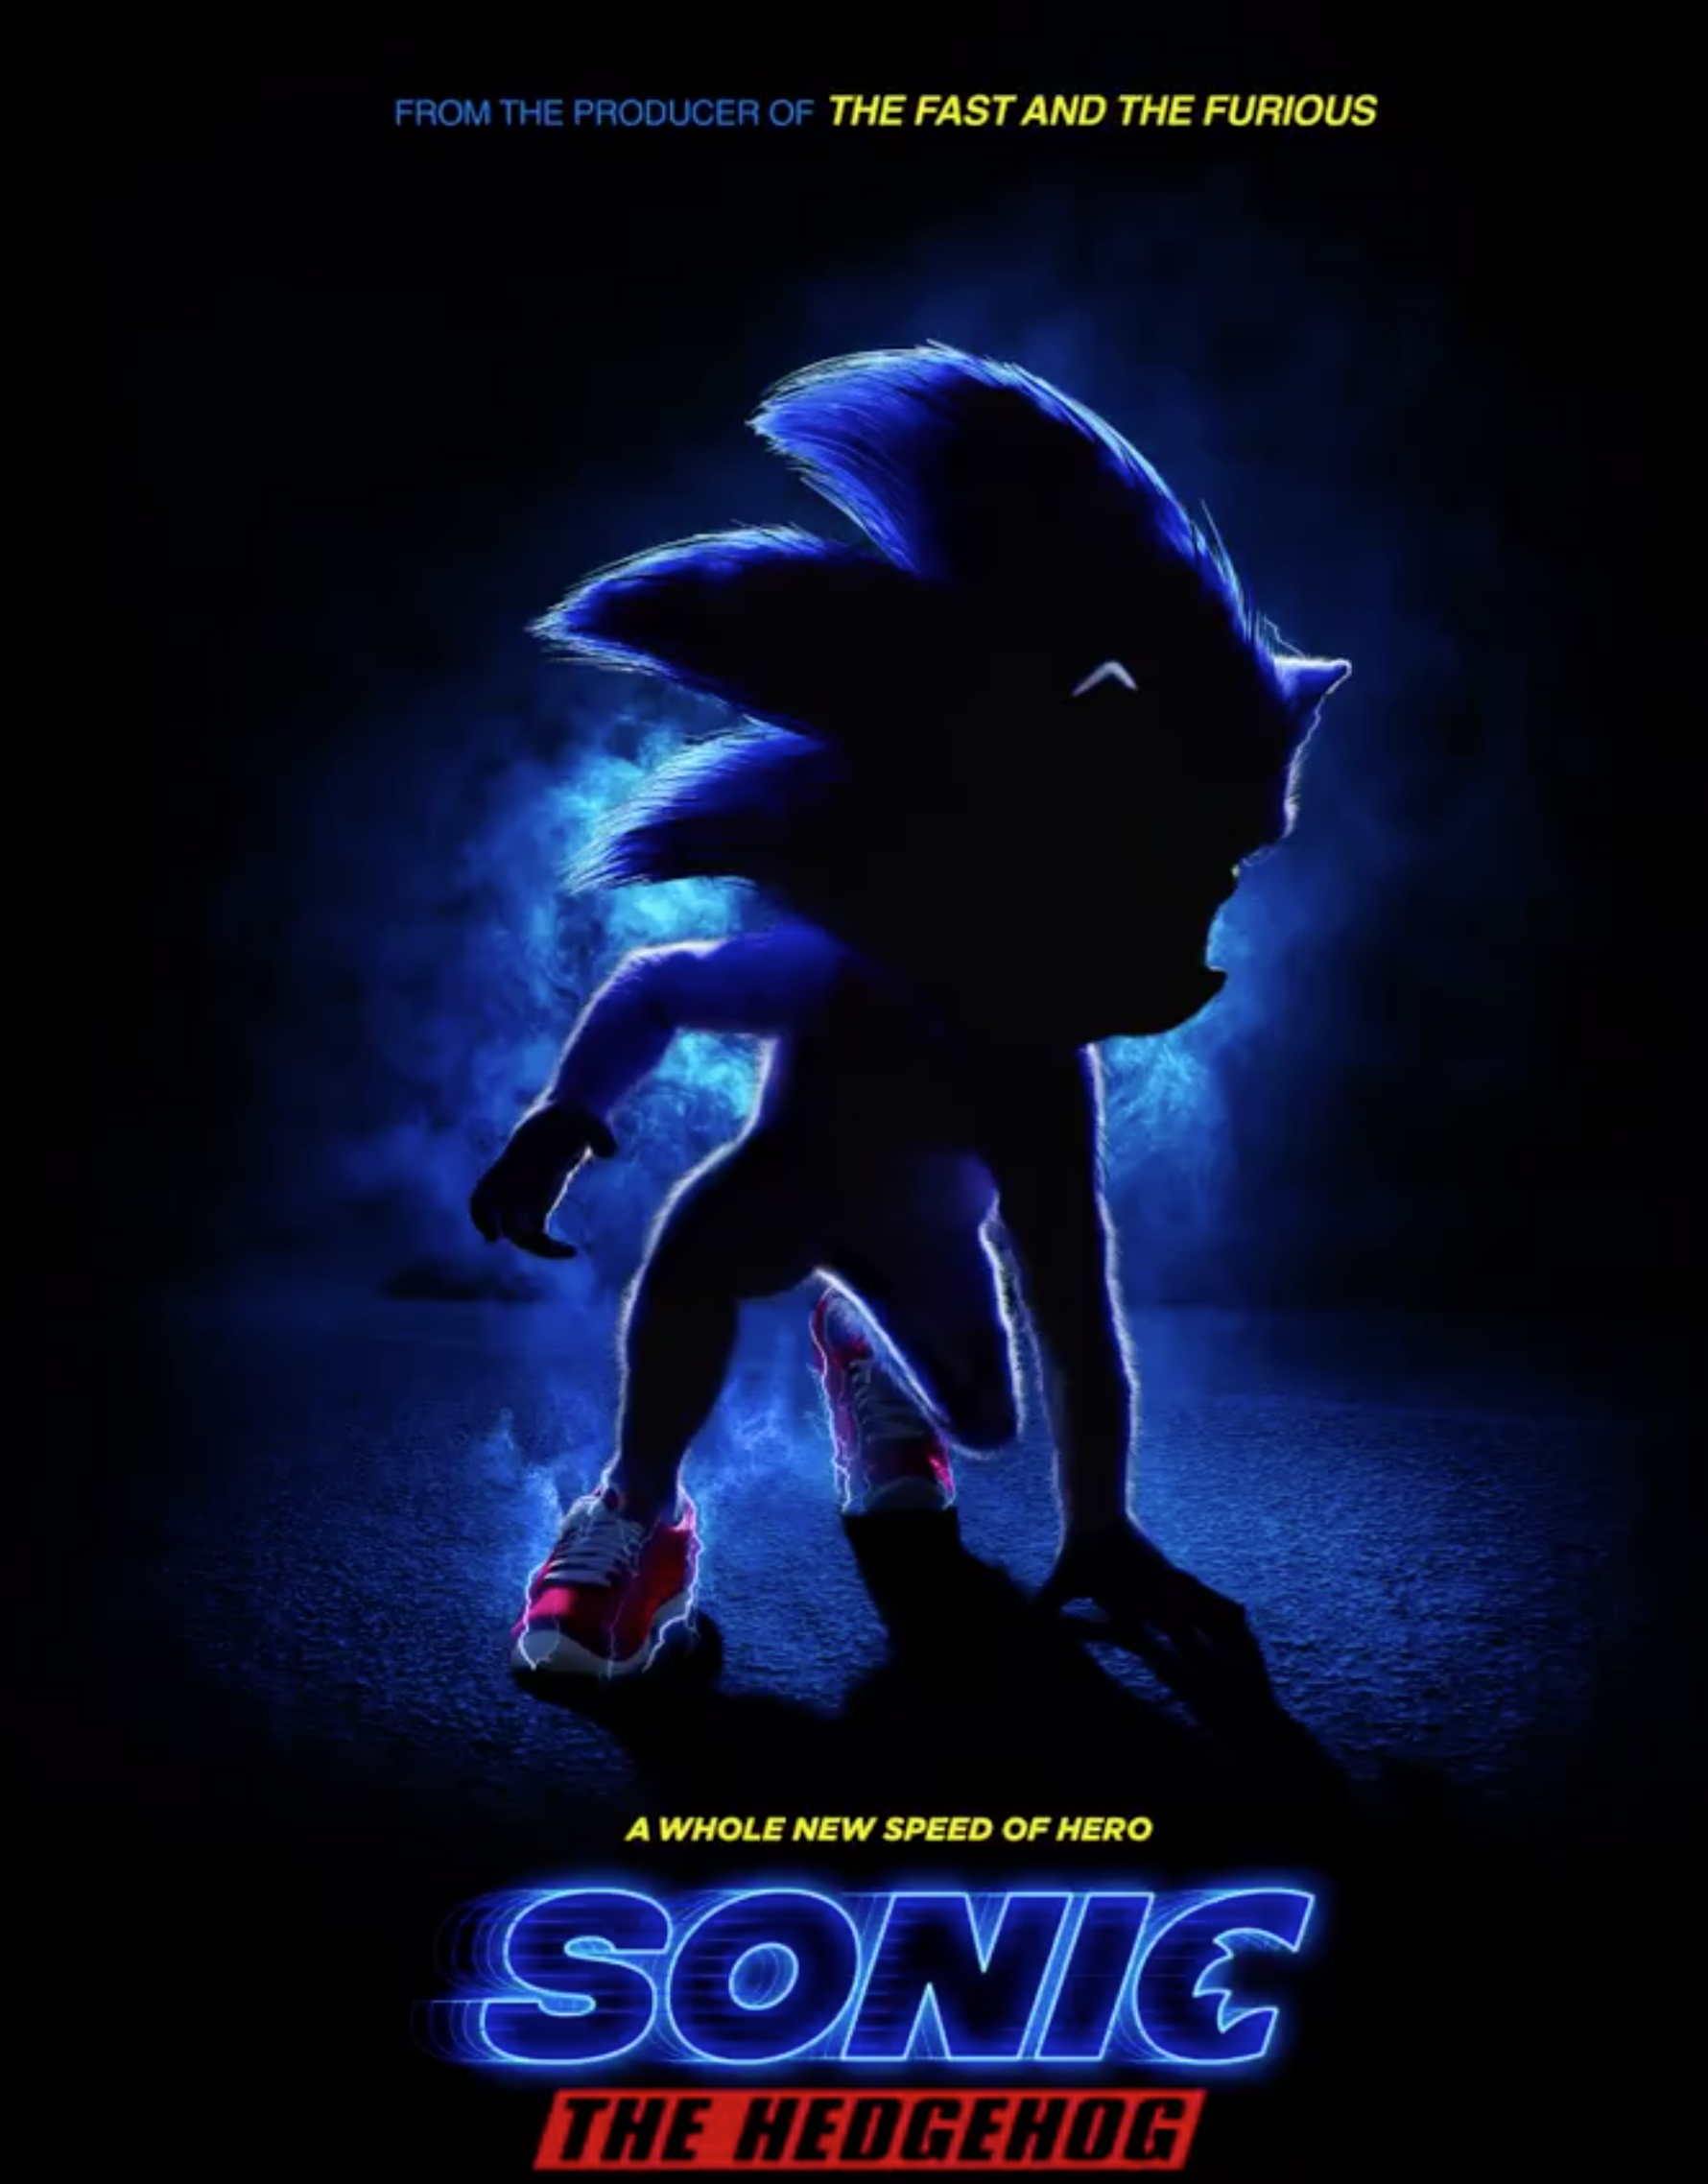 Sonic The Hedgehog looks strange in first movie poster